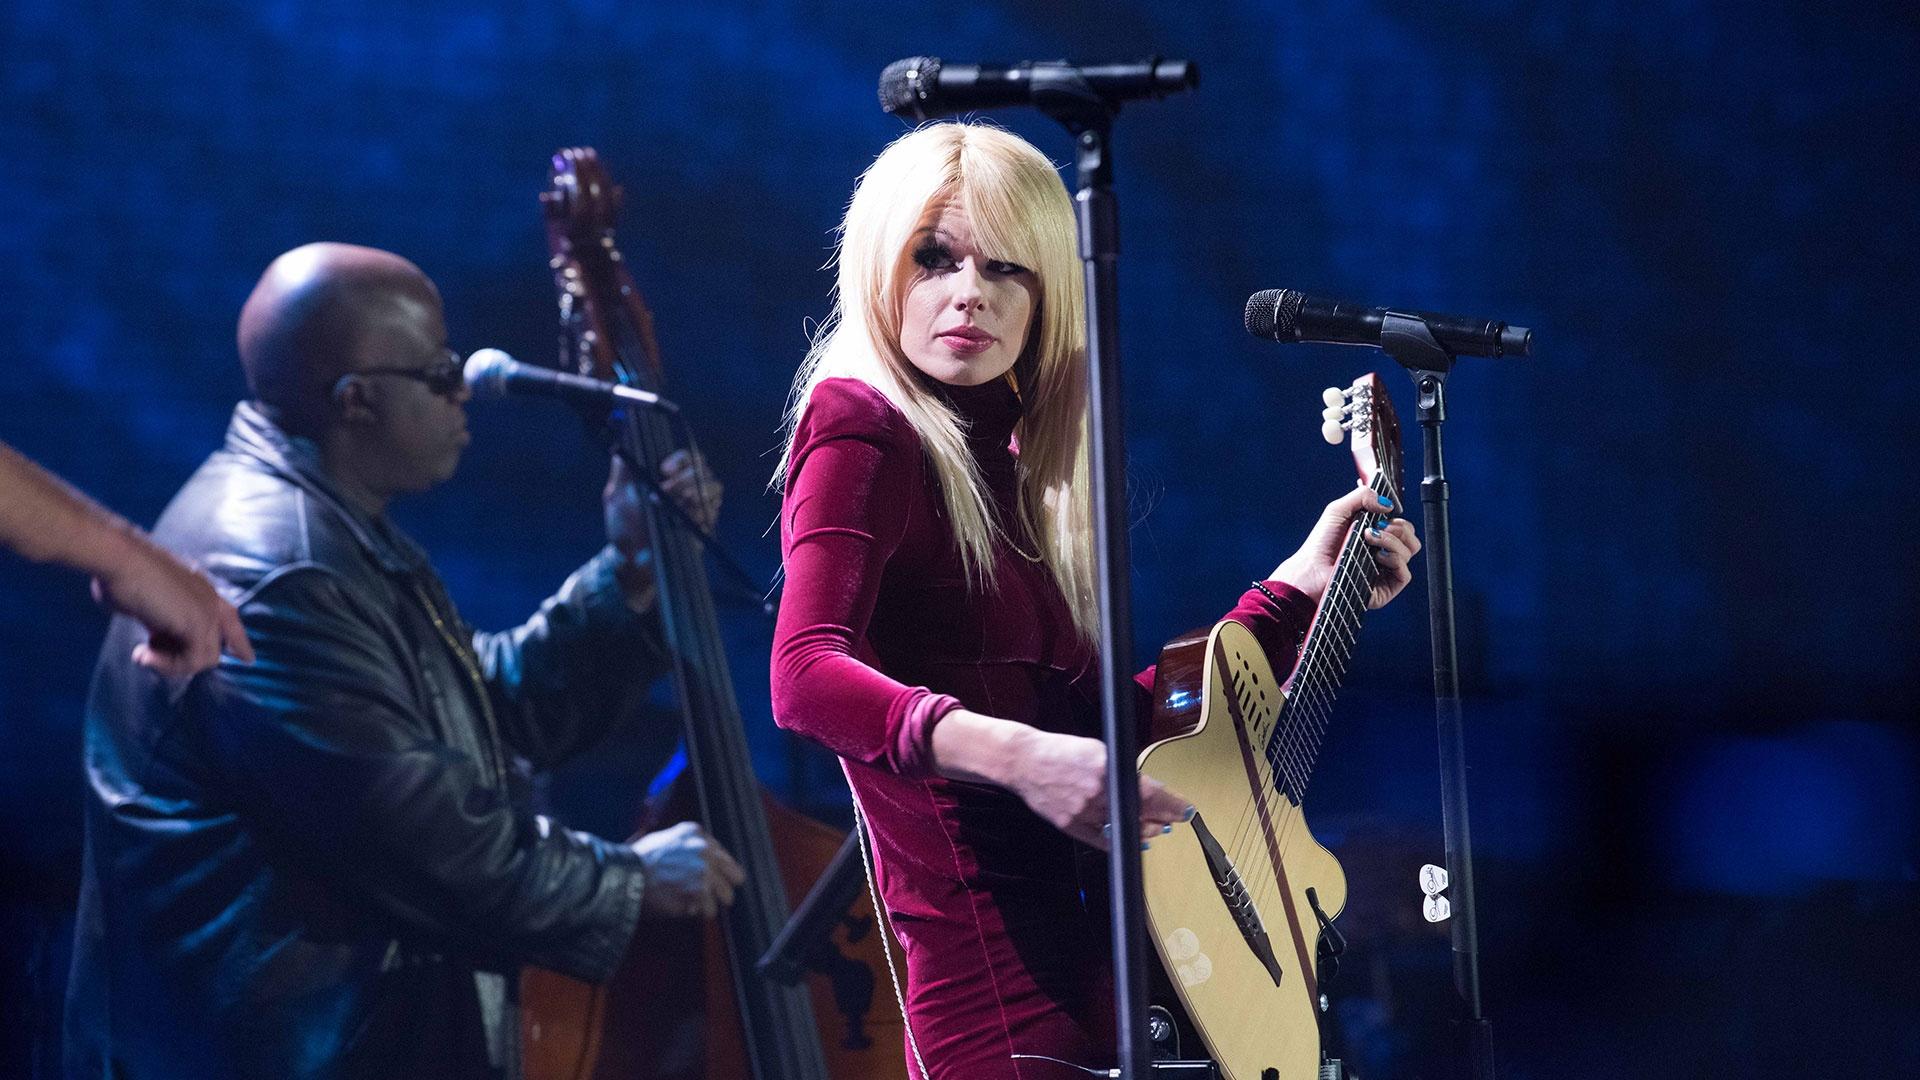 Virtuoso guitarist, Orianthi, looks to her partner amidst a cheering crowd of "Soundstage" fans.